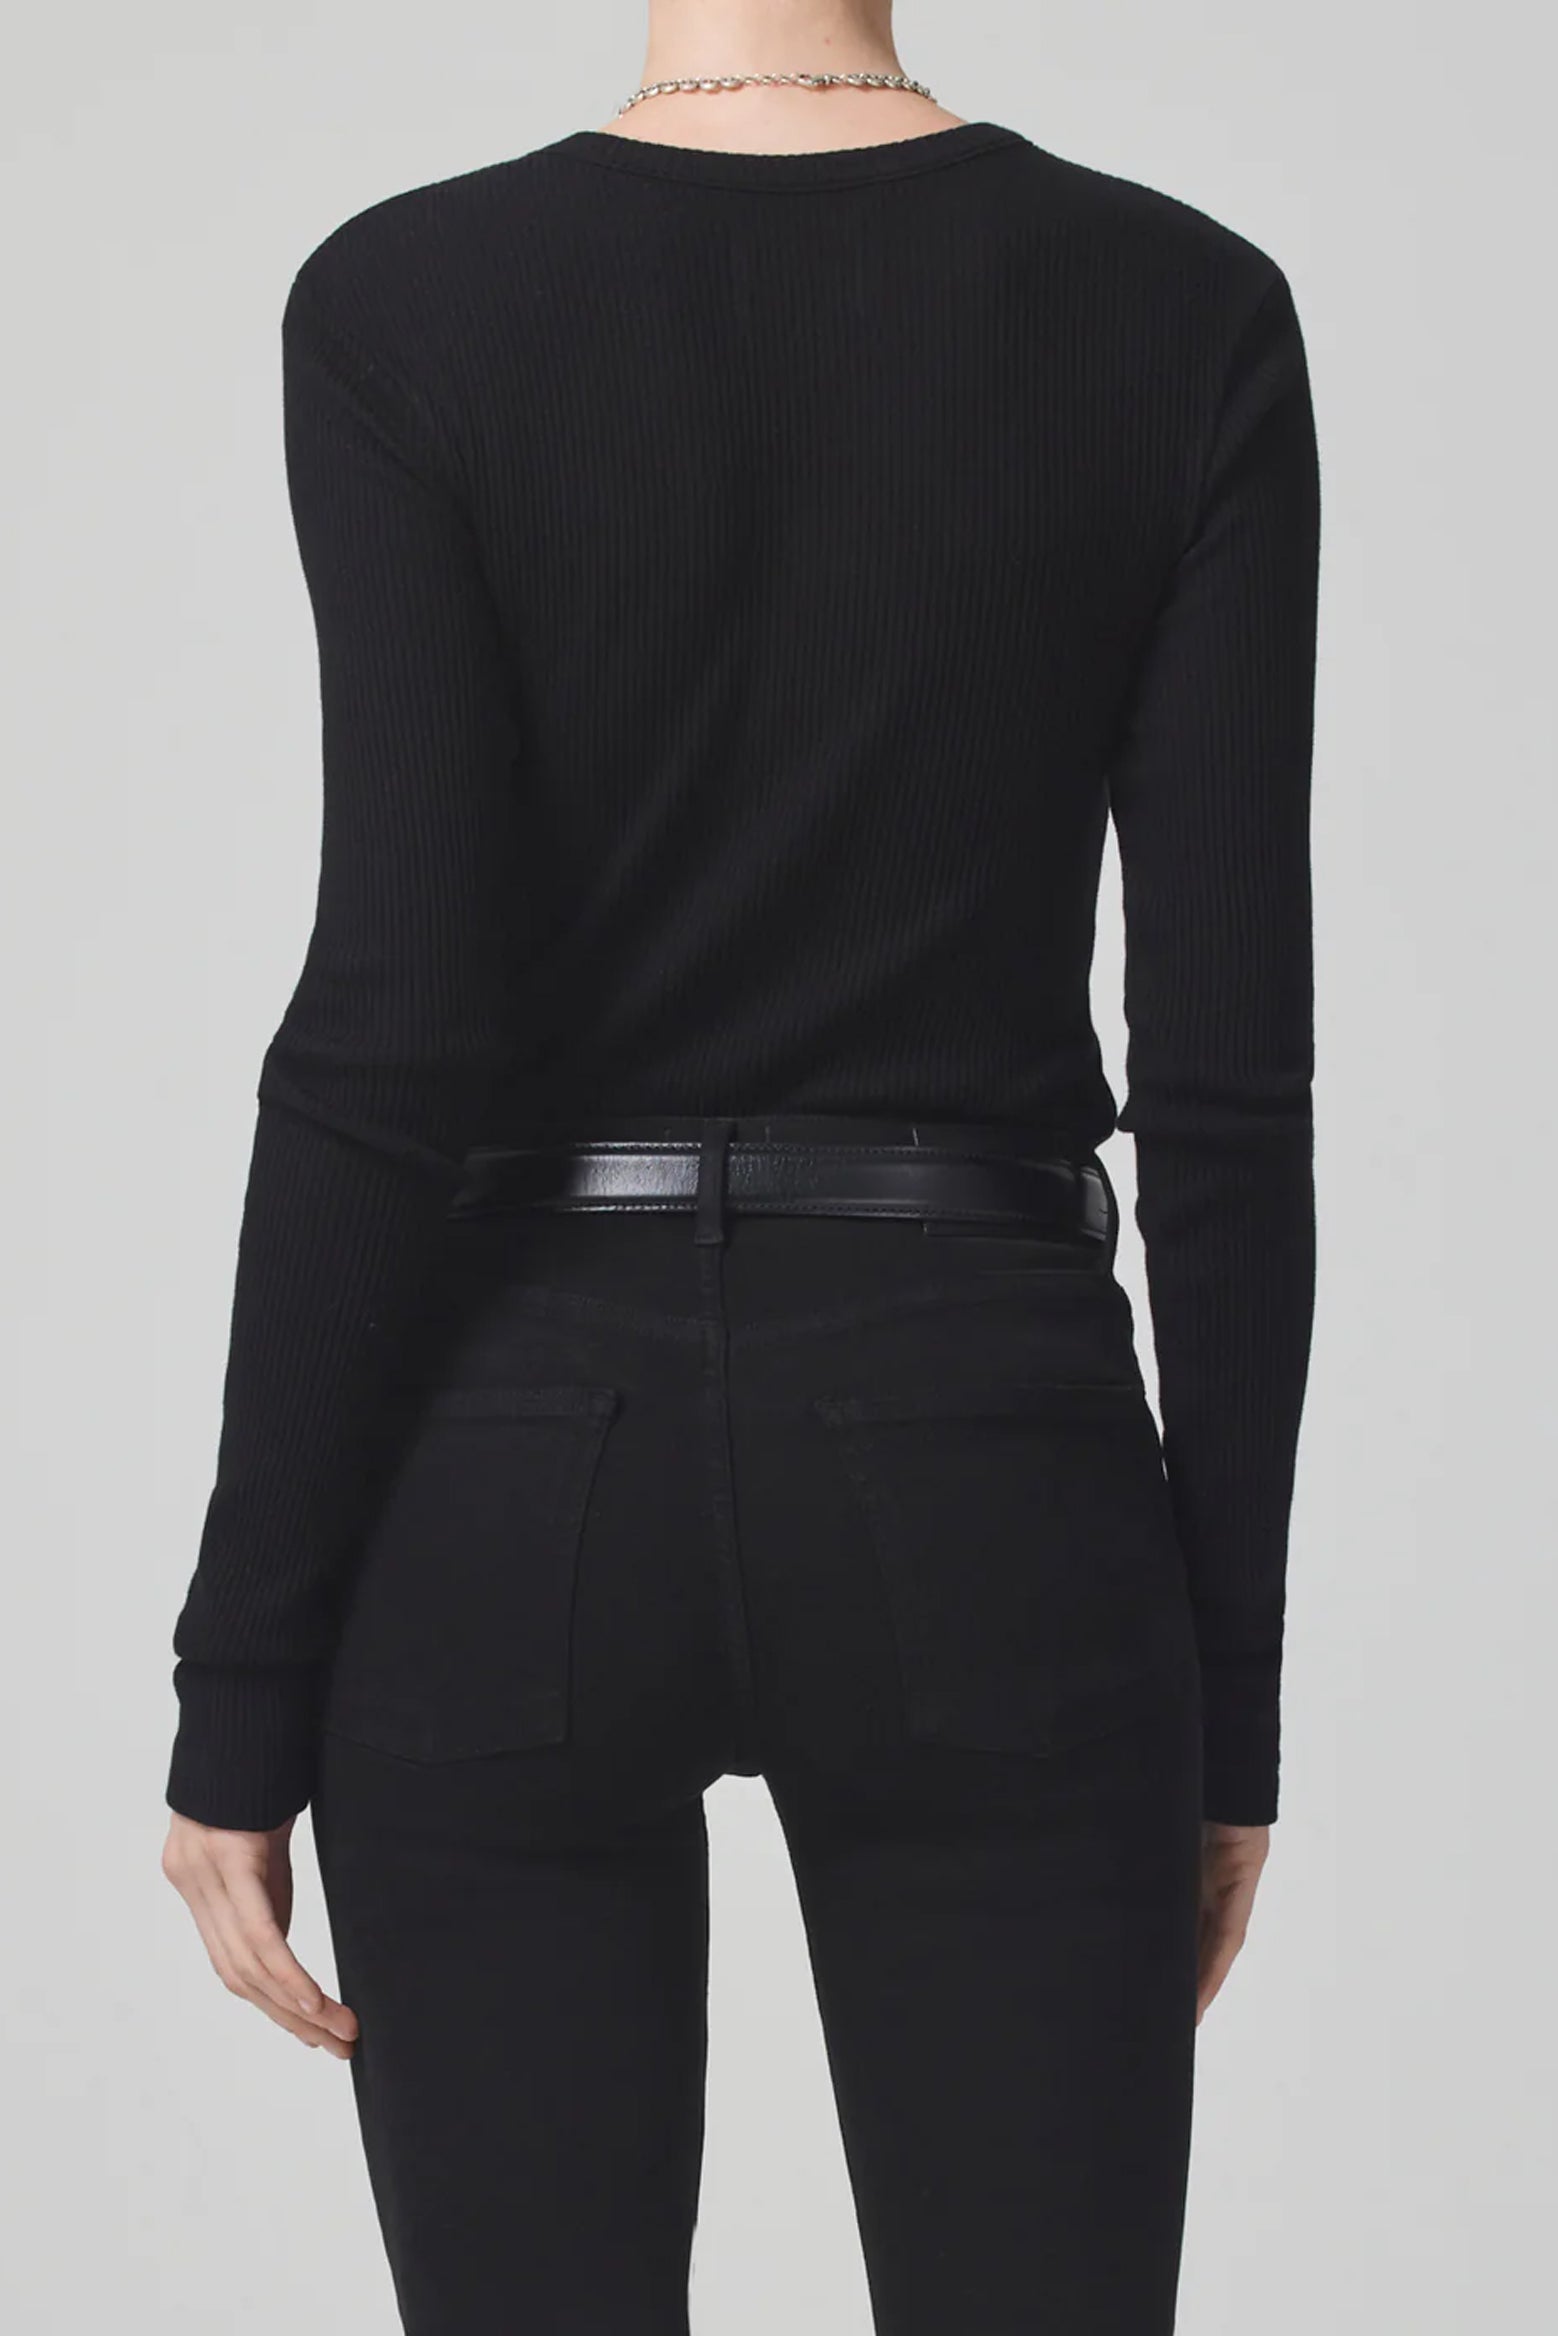 Citizens Of Humanity Bina Crewneck in Black available at The New Trend Australia.